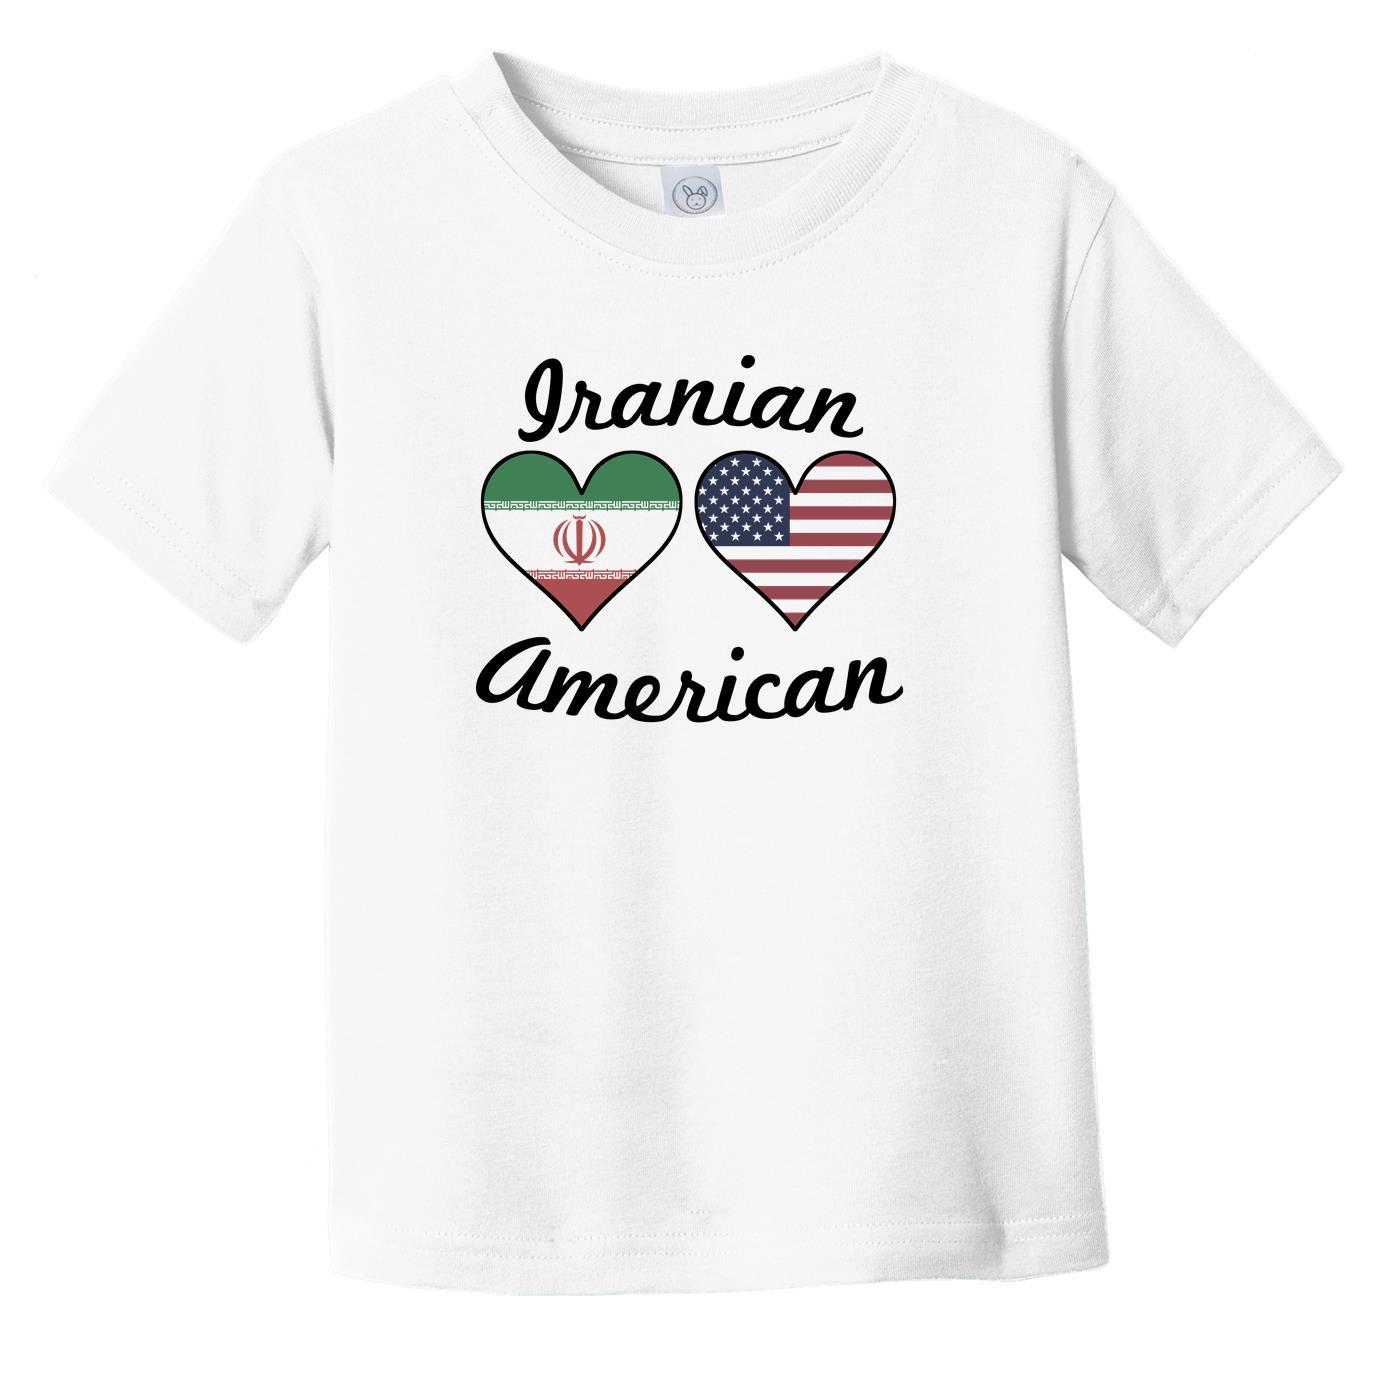 Iranian American Flag Hearts Infant Toddler T-Shirt